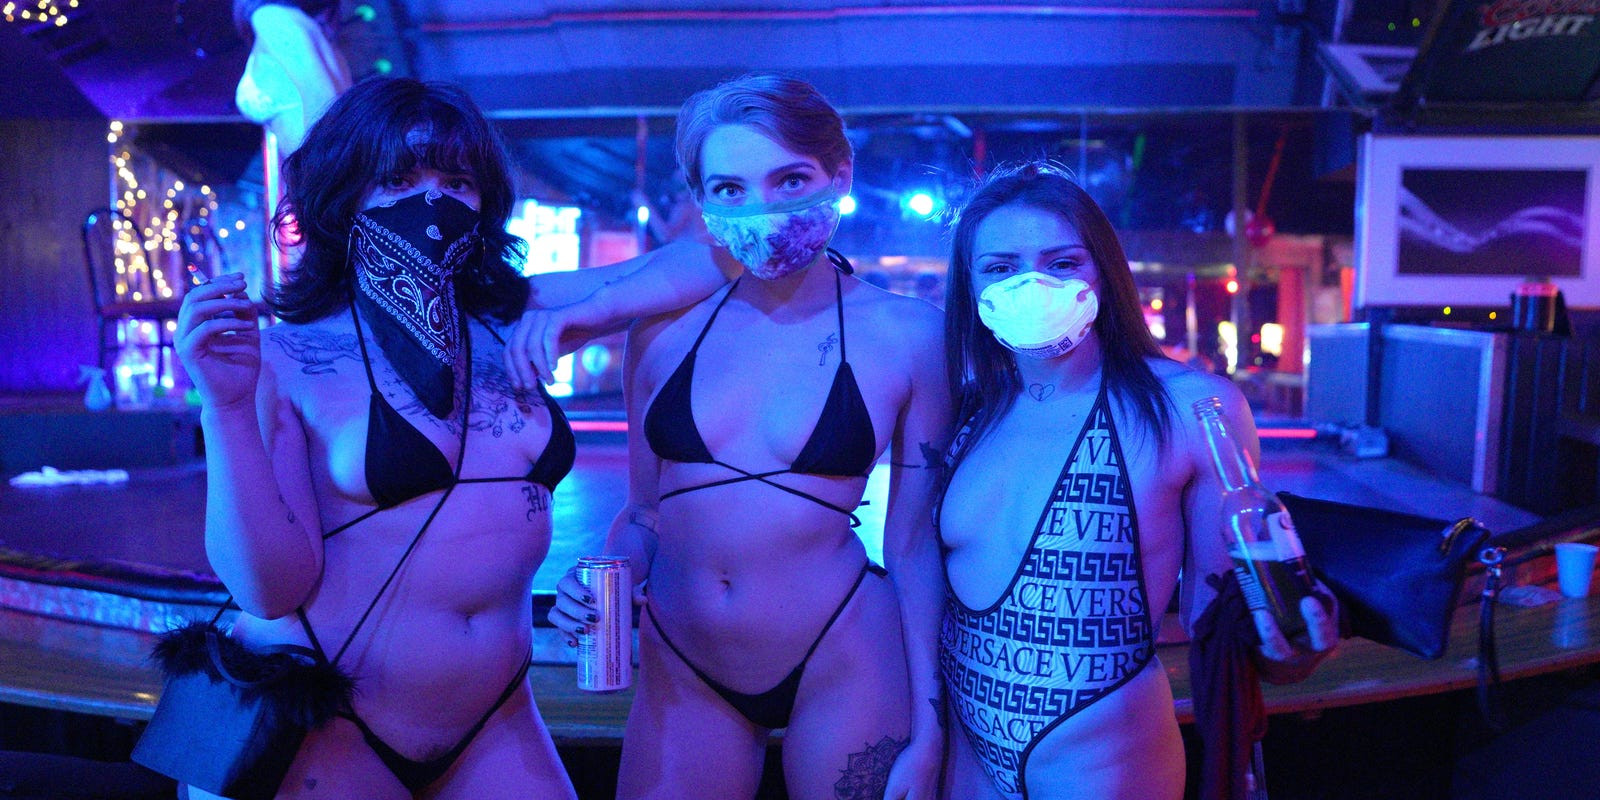 Www Xxx Vido Hd 16 - Strip clubs are reopening: Wyoming club throws 'masks on' party